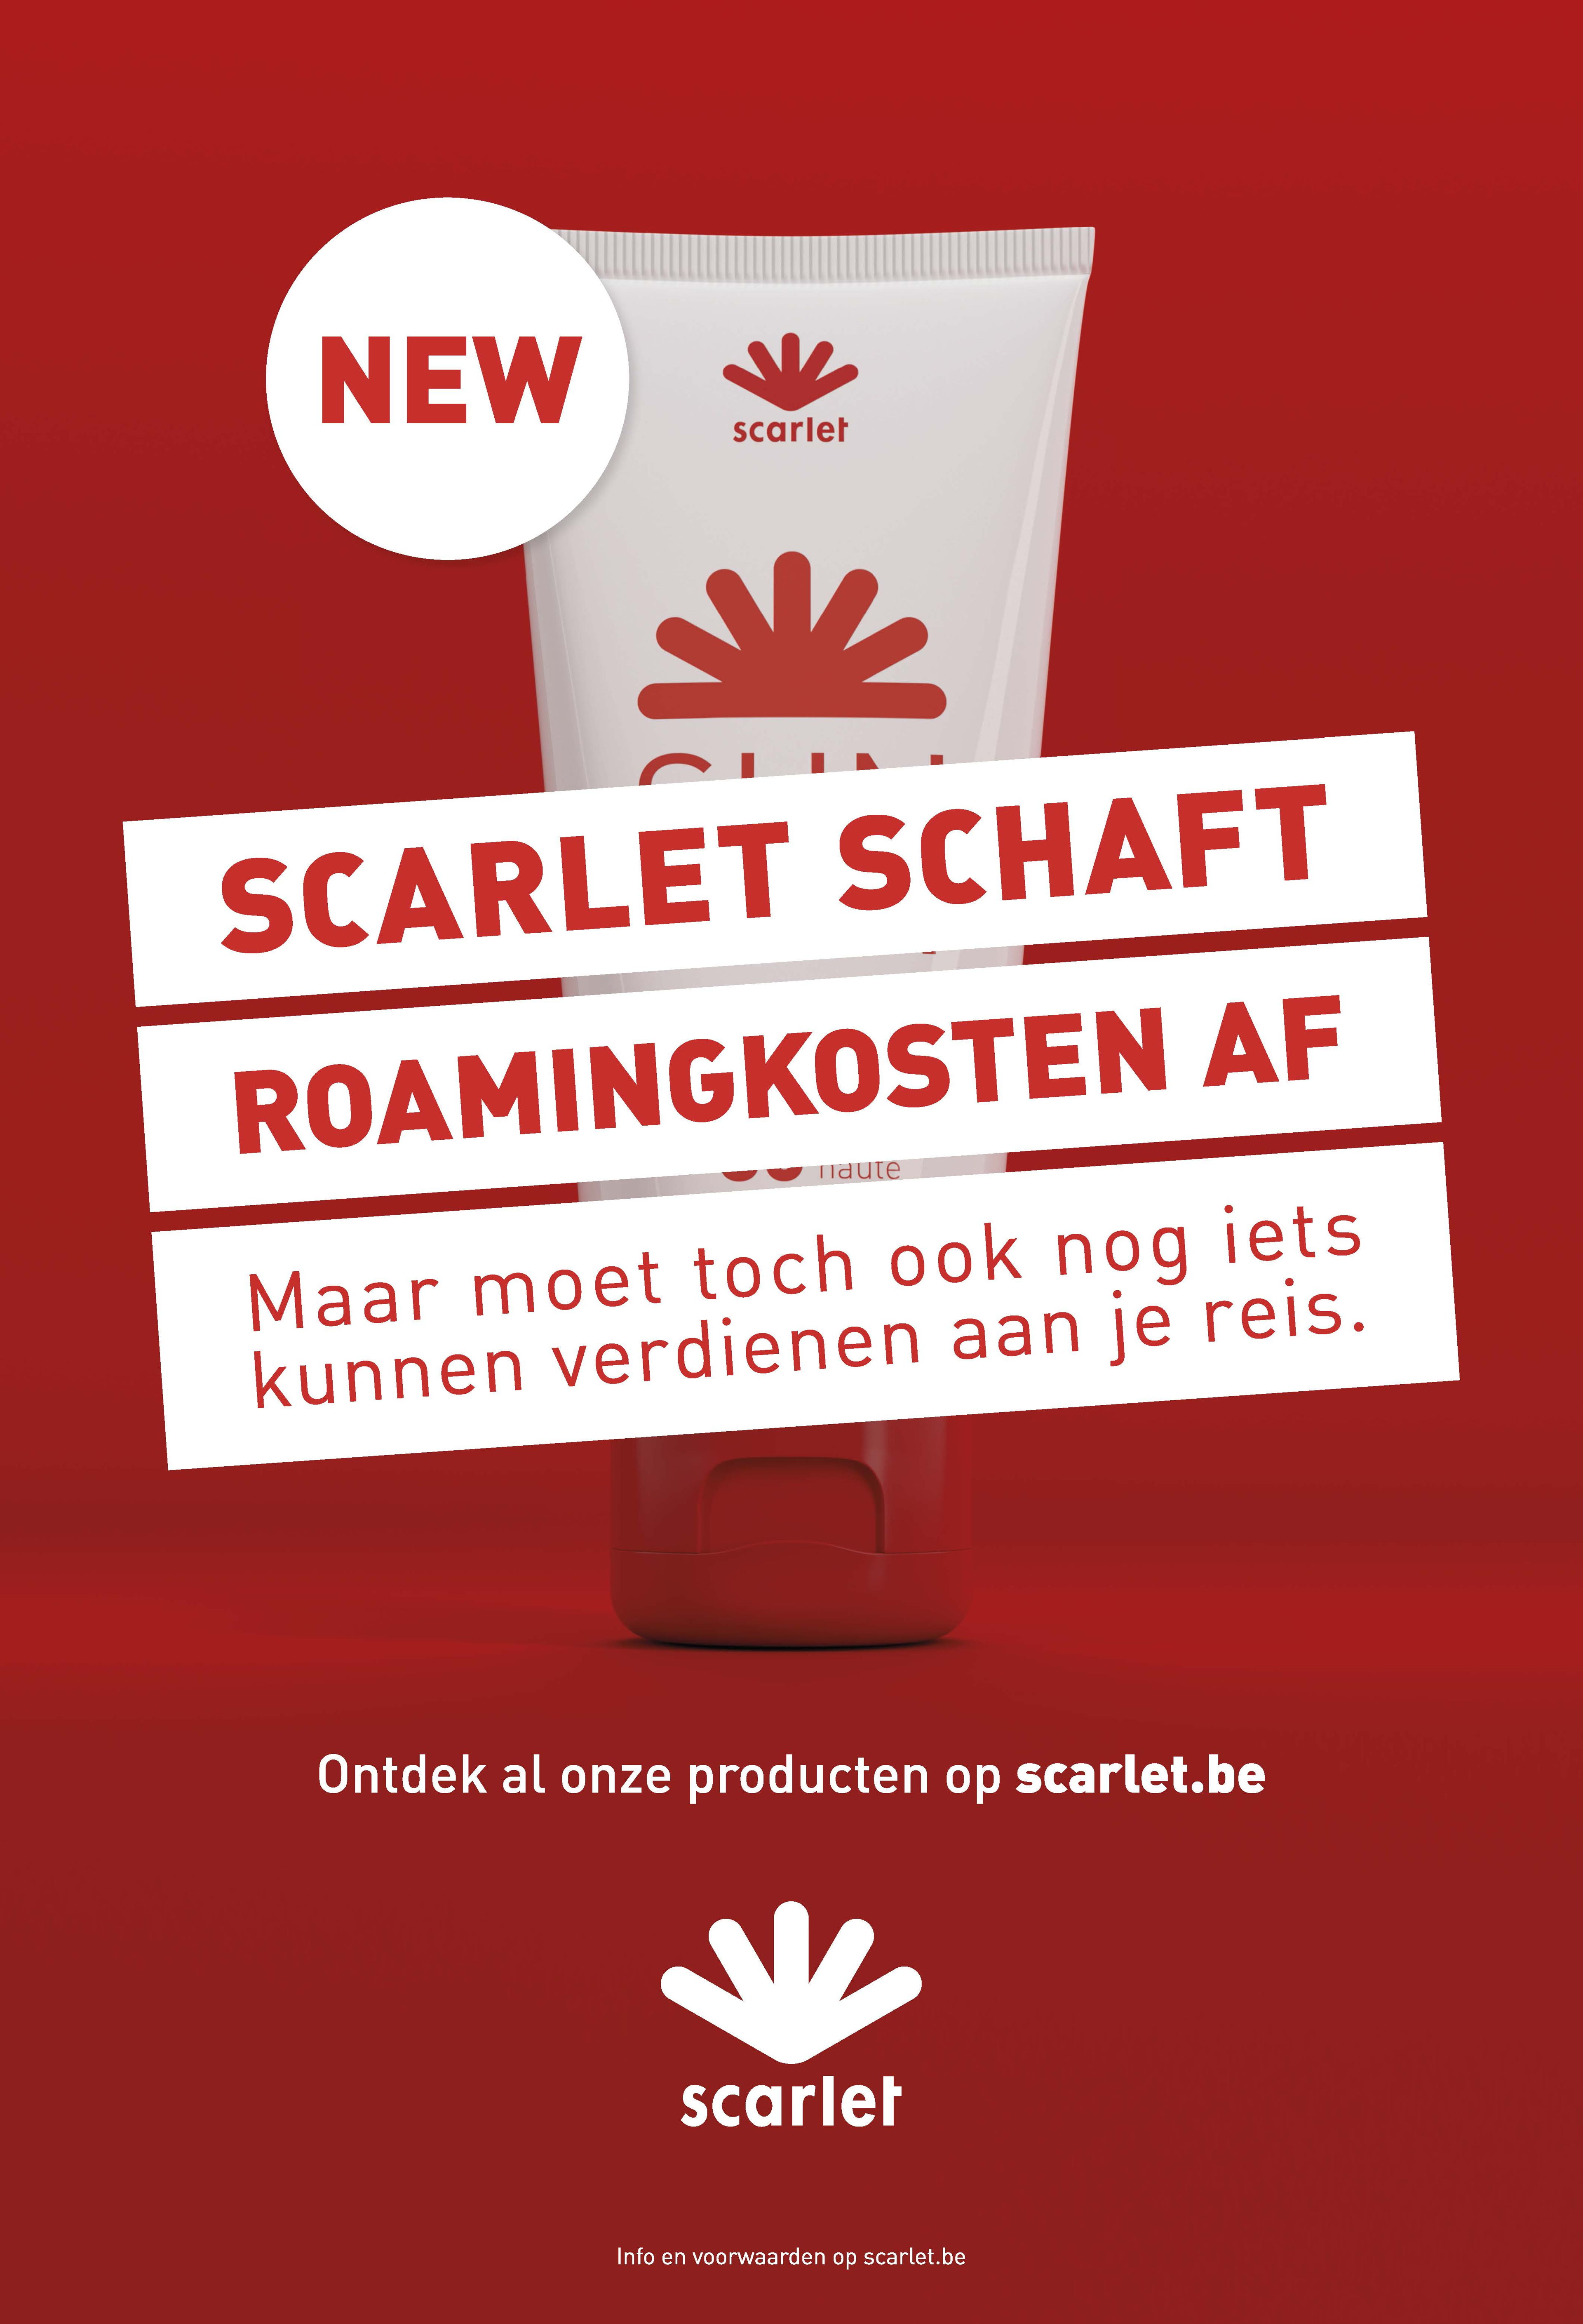 Scarlet COMPLETELY abolishes roaming costs for all its customers